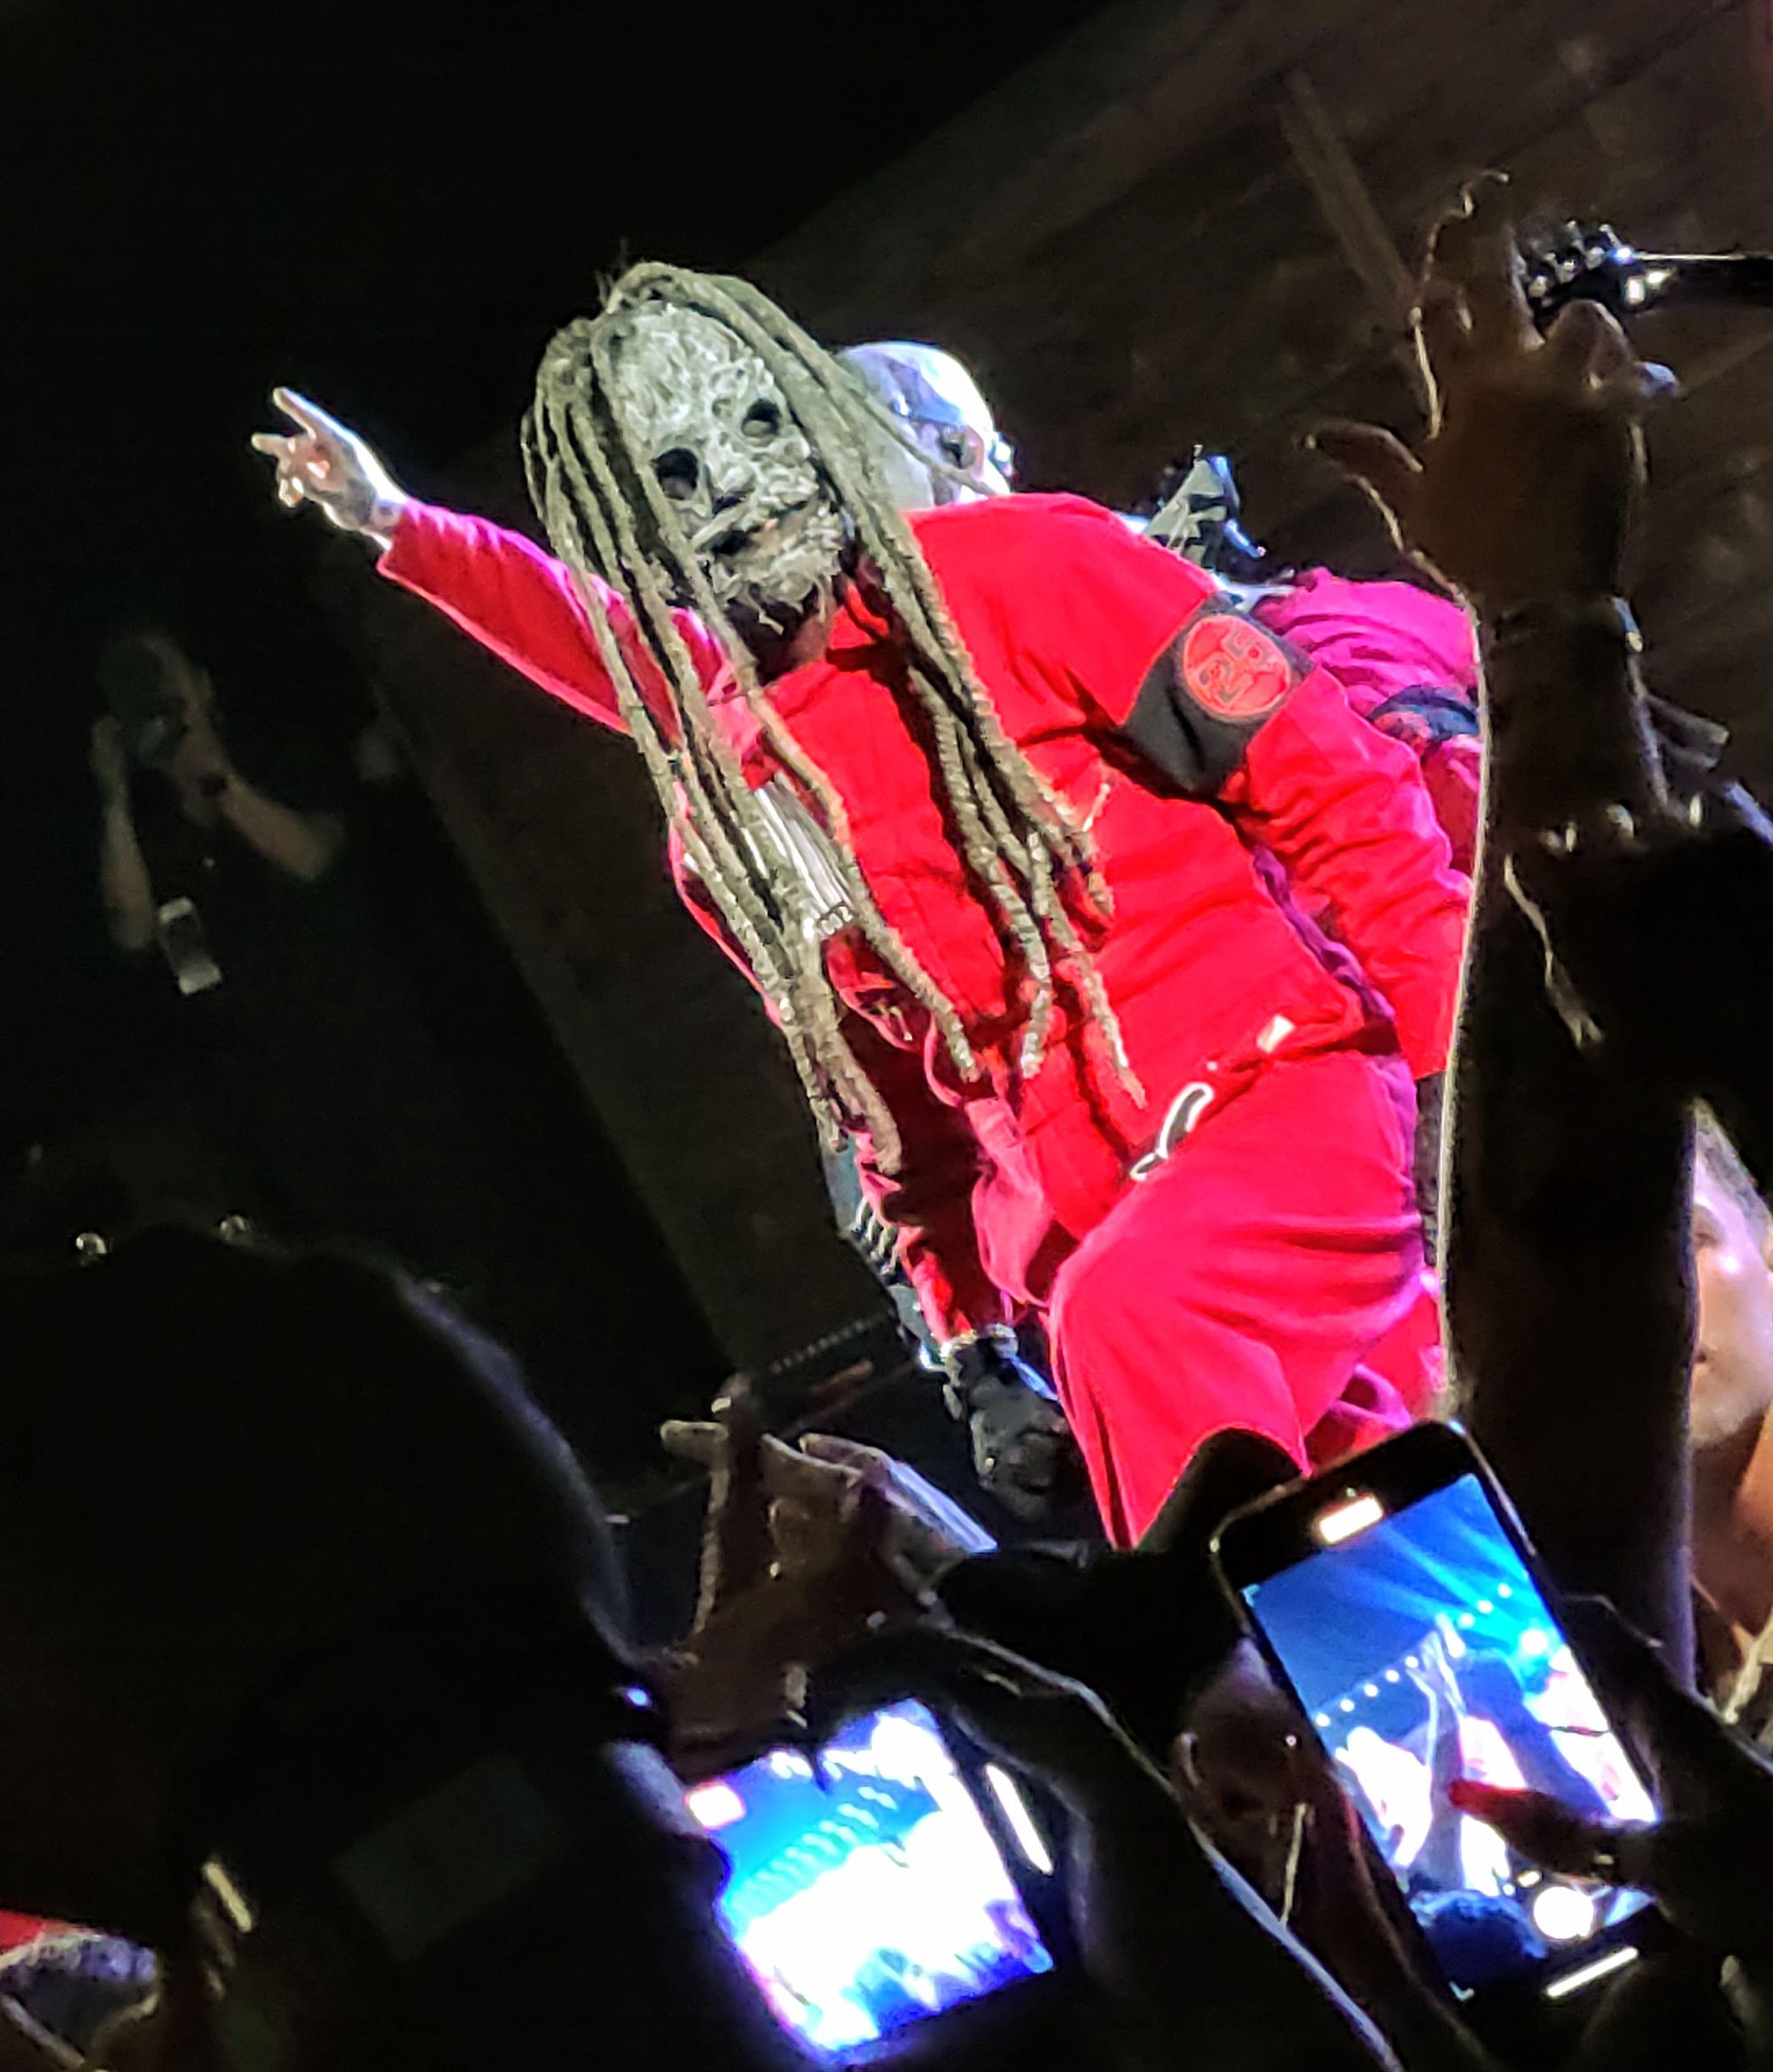 Concert Review: Slipknot, live at Pappy + Harriet’s